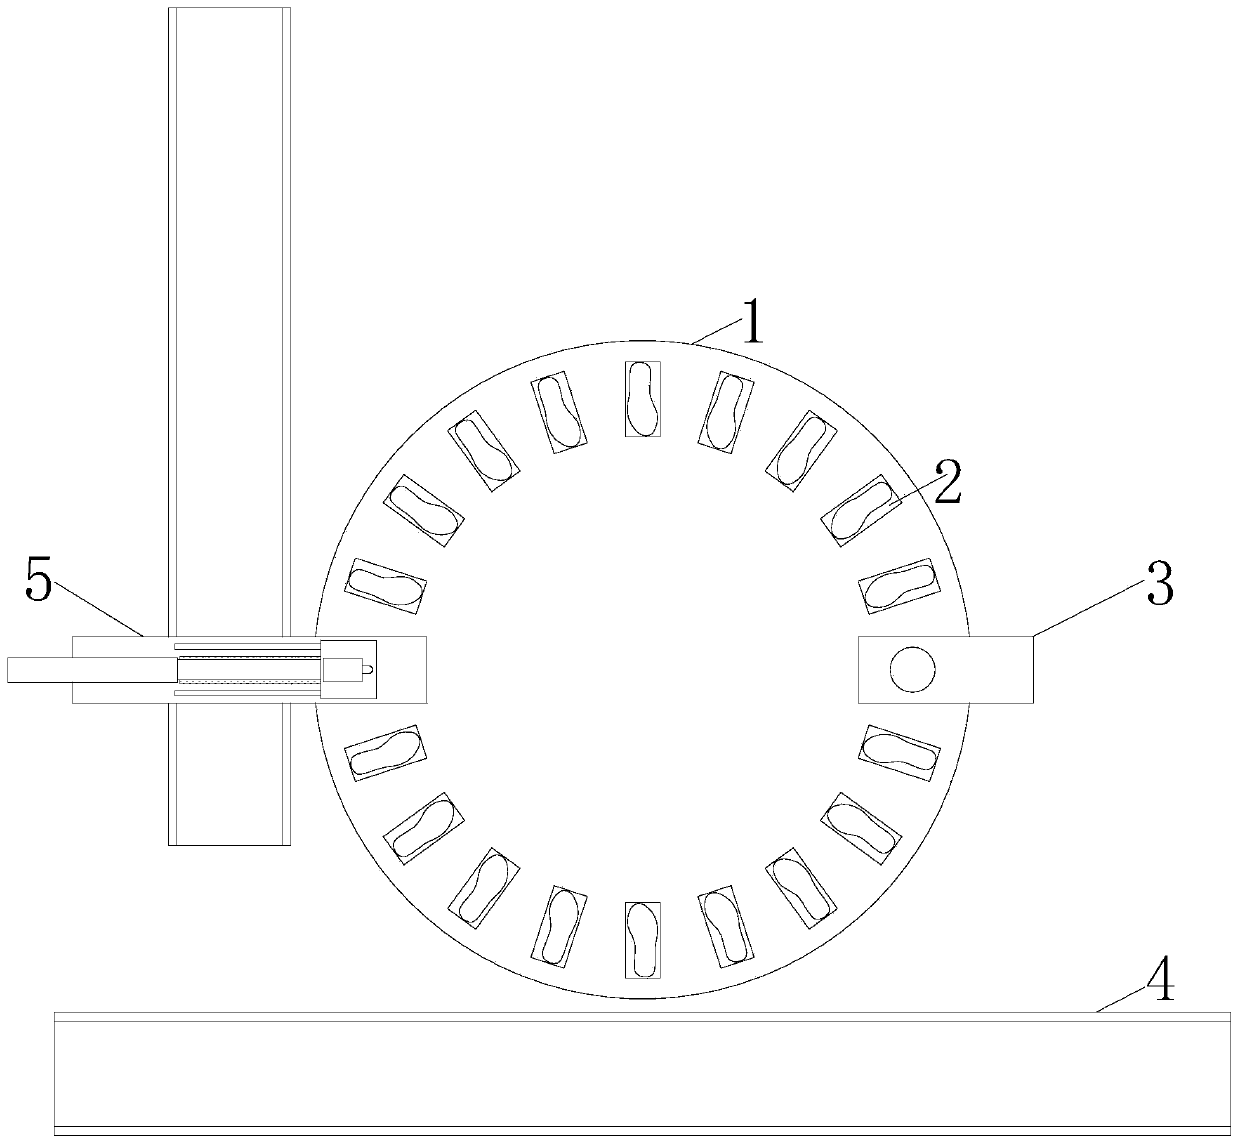 Shoe sole corner punching device for shoe processing